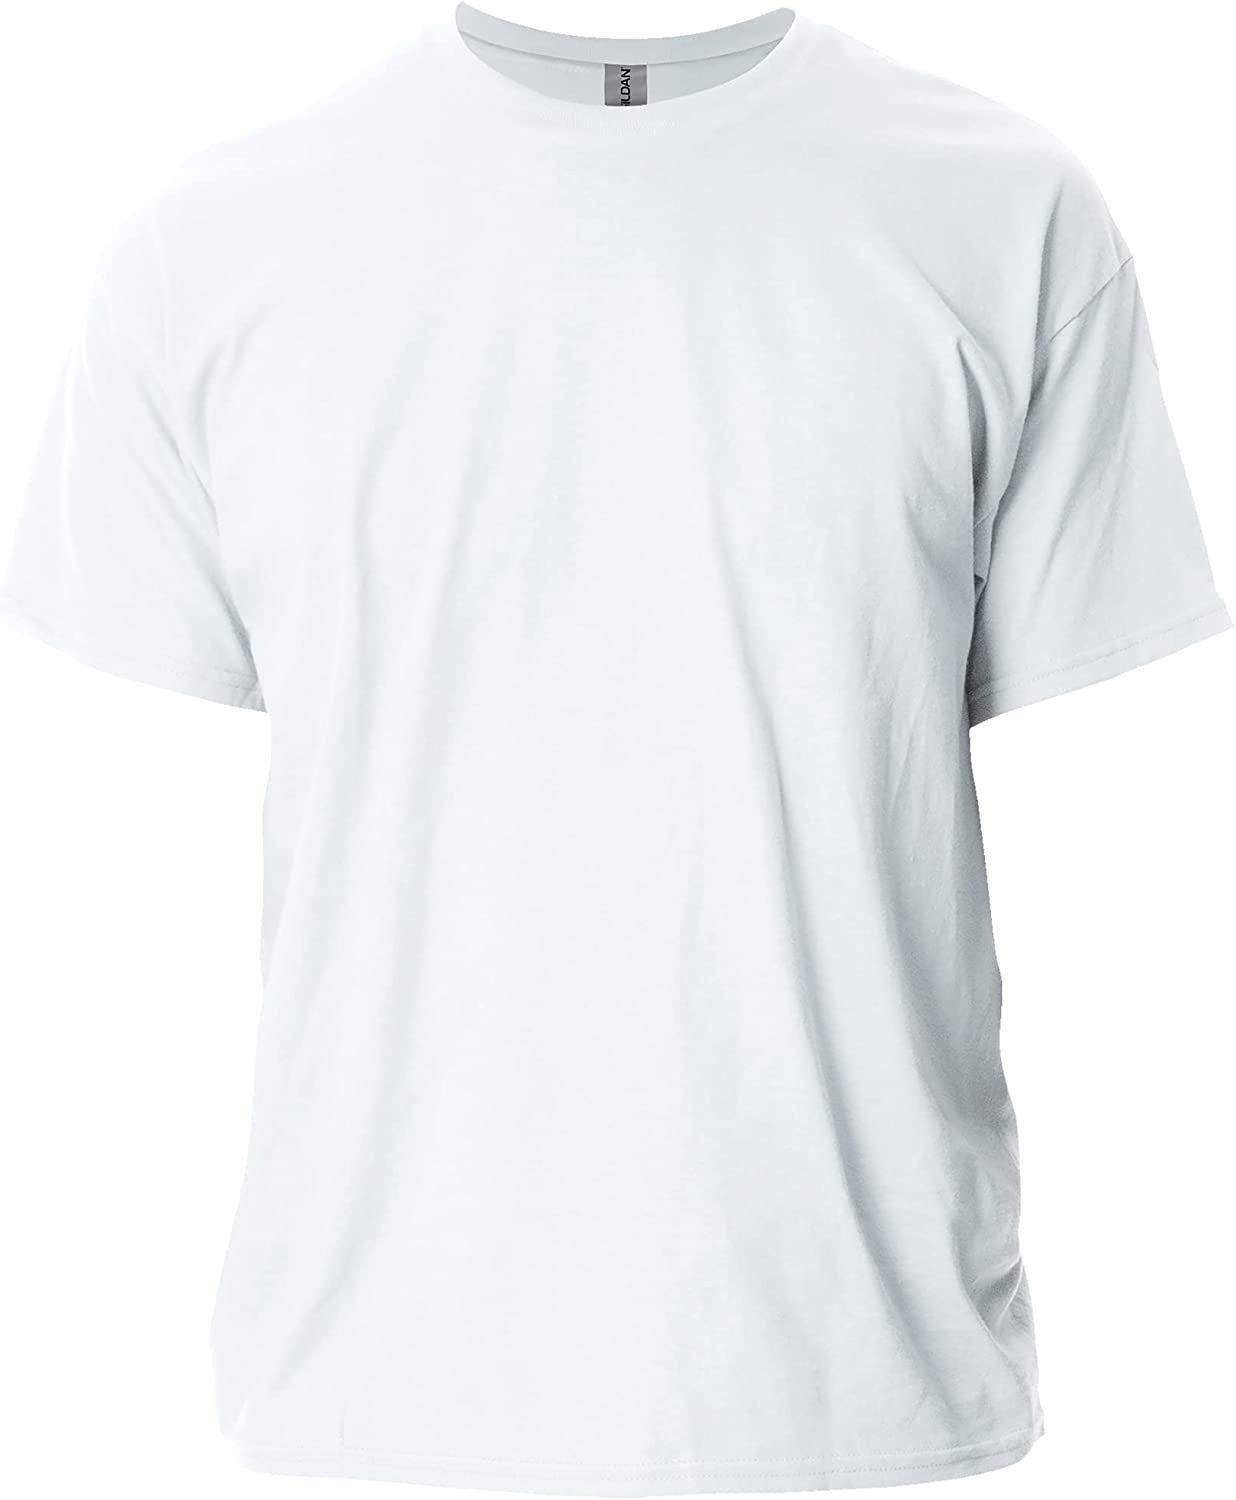 Wholesale Cotton Crew T-Shirts Fit Blank All Colors Available